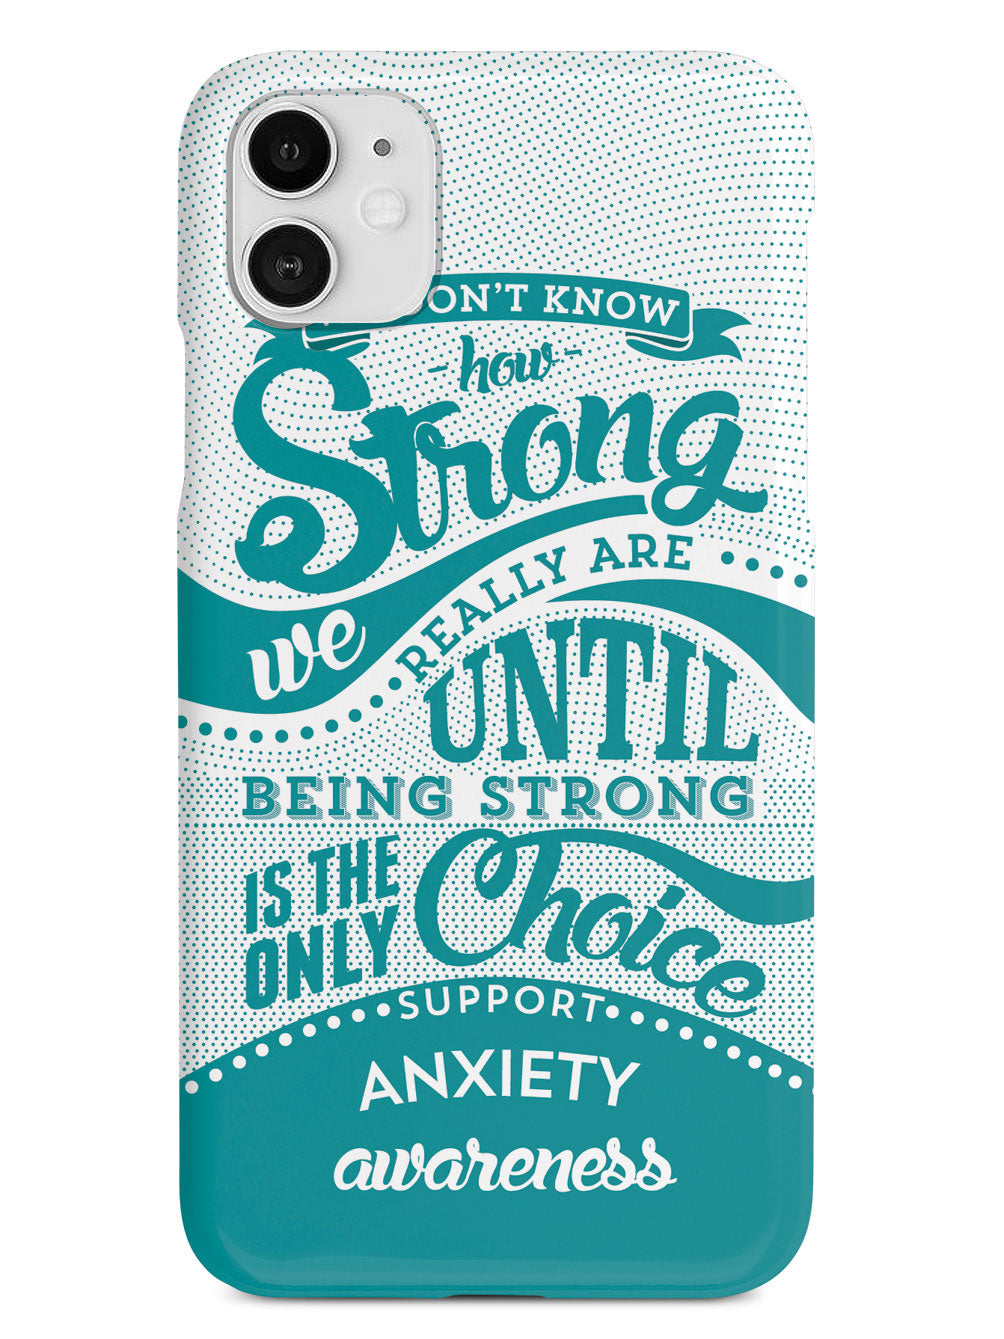 Anxiety Disorder Awareness - How Strong Case